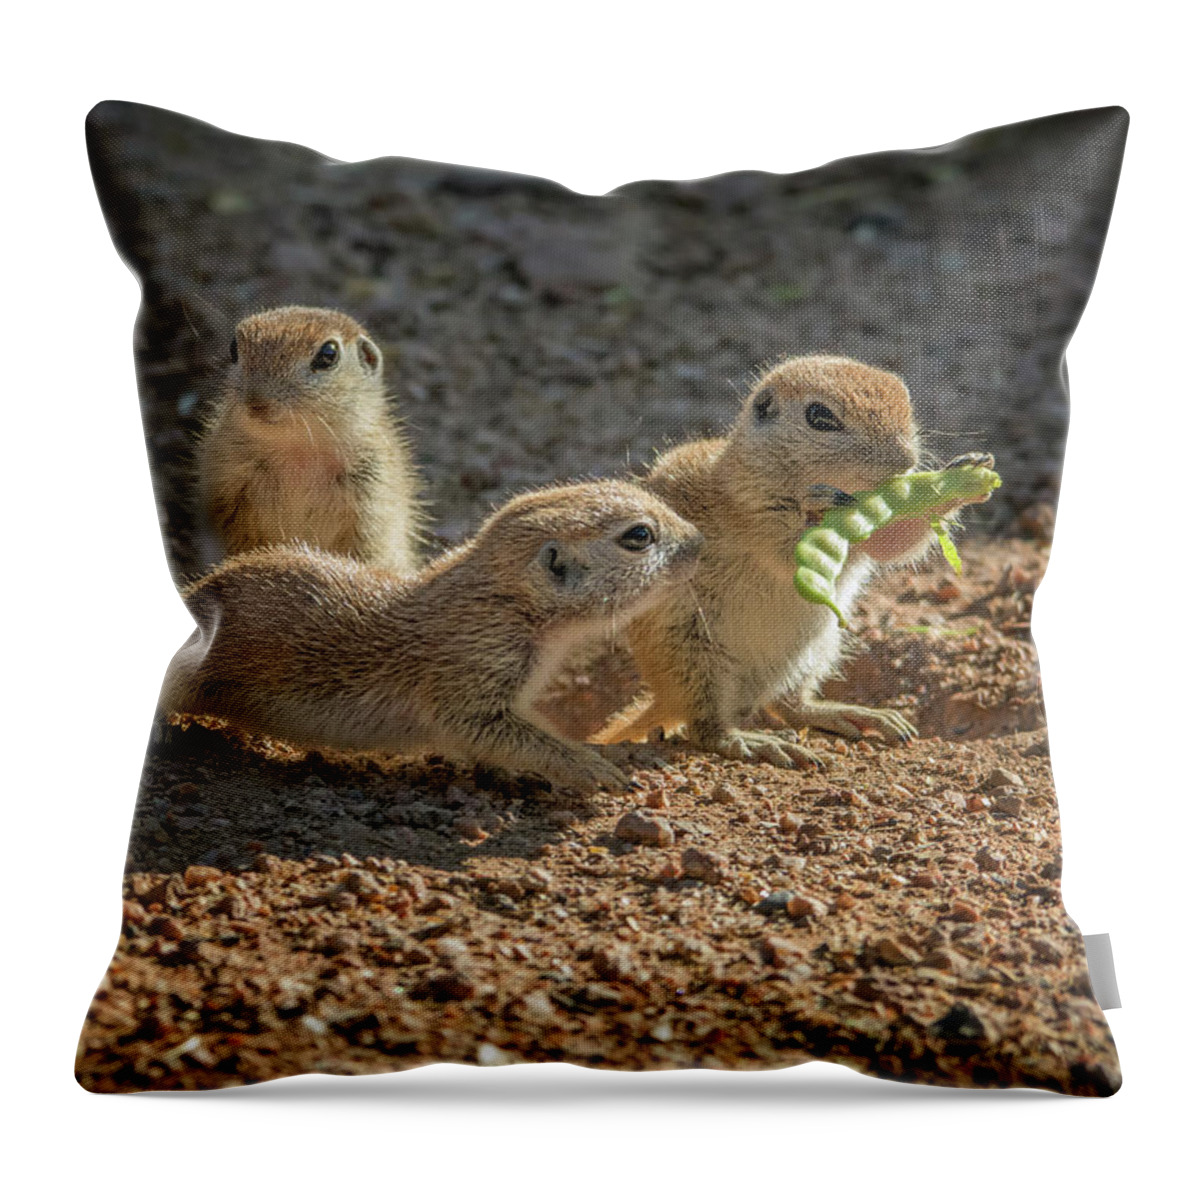 Round-tailed Throw Pillow featuring the photograph Round-tailed Ground Squirrels 1198 by Tam Ryan